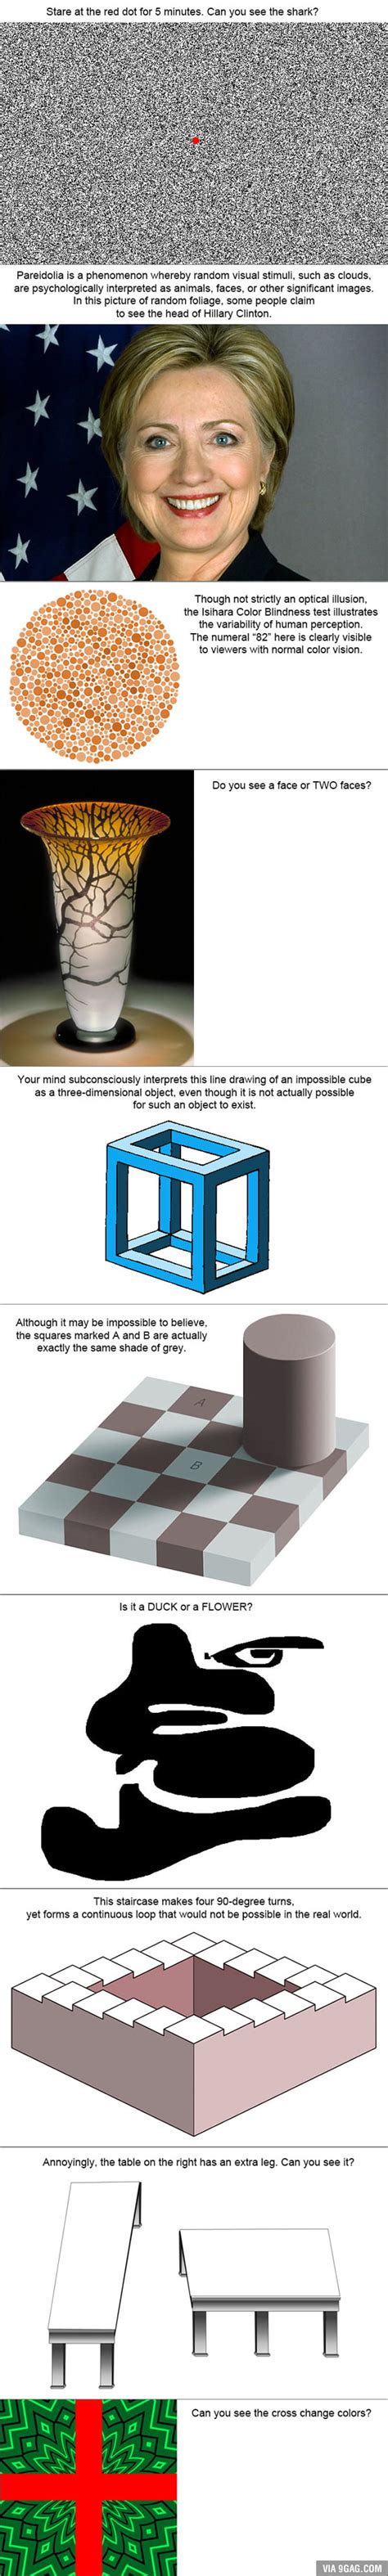 Top 10 Greatest Optical Illusions Ever 9gag